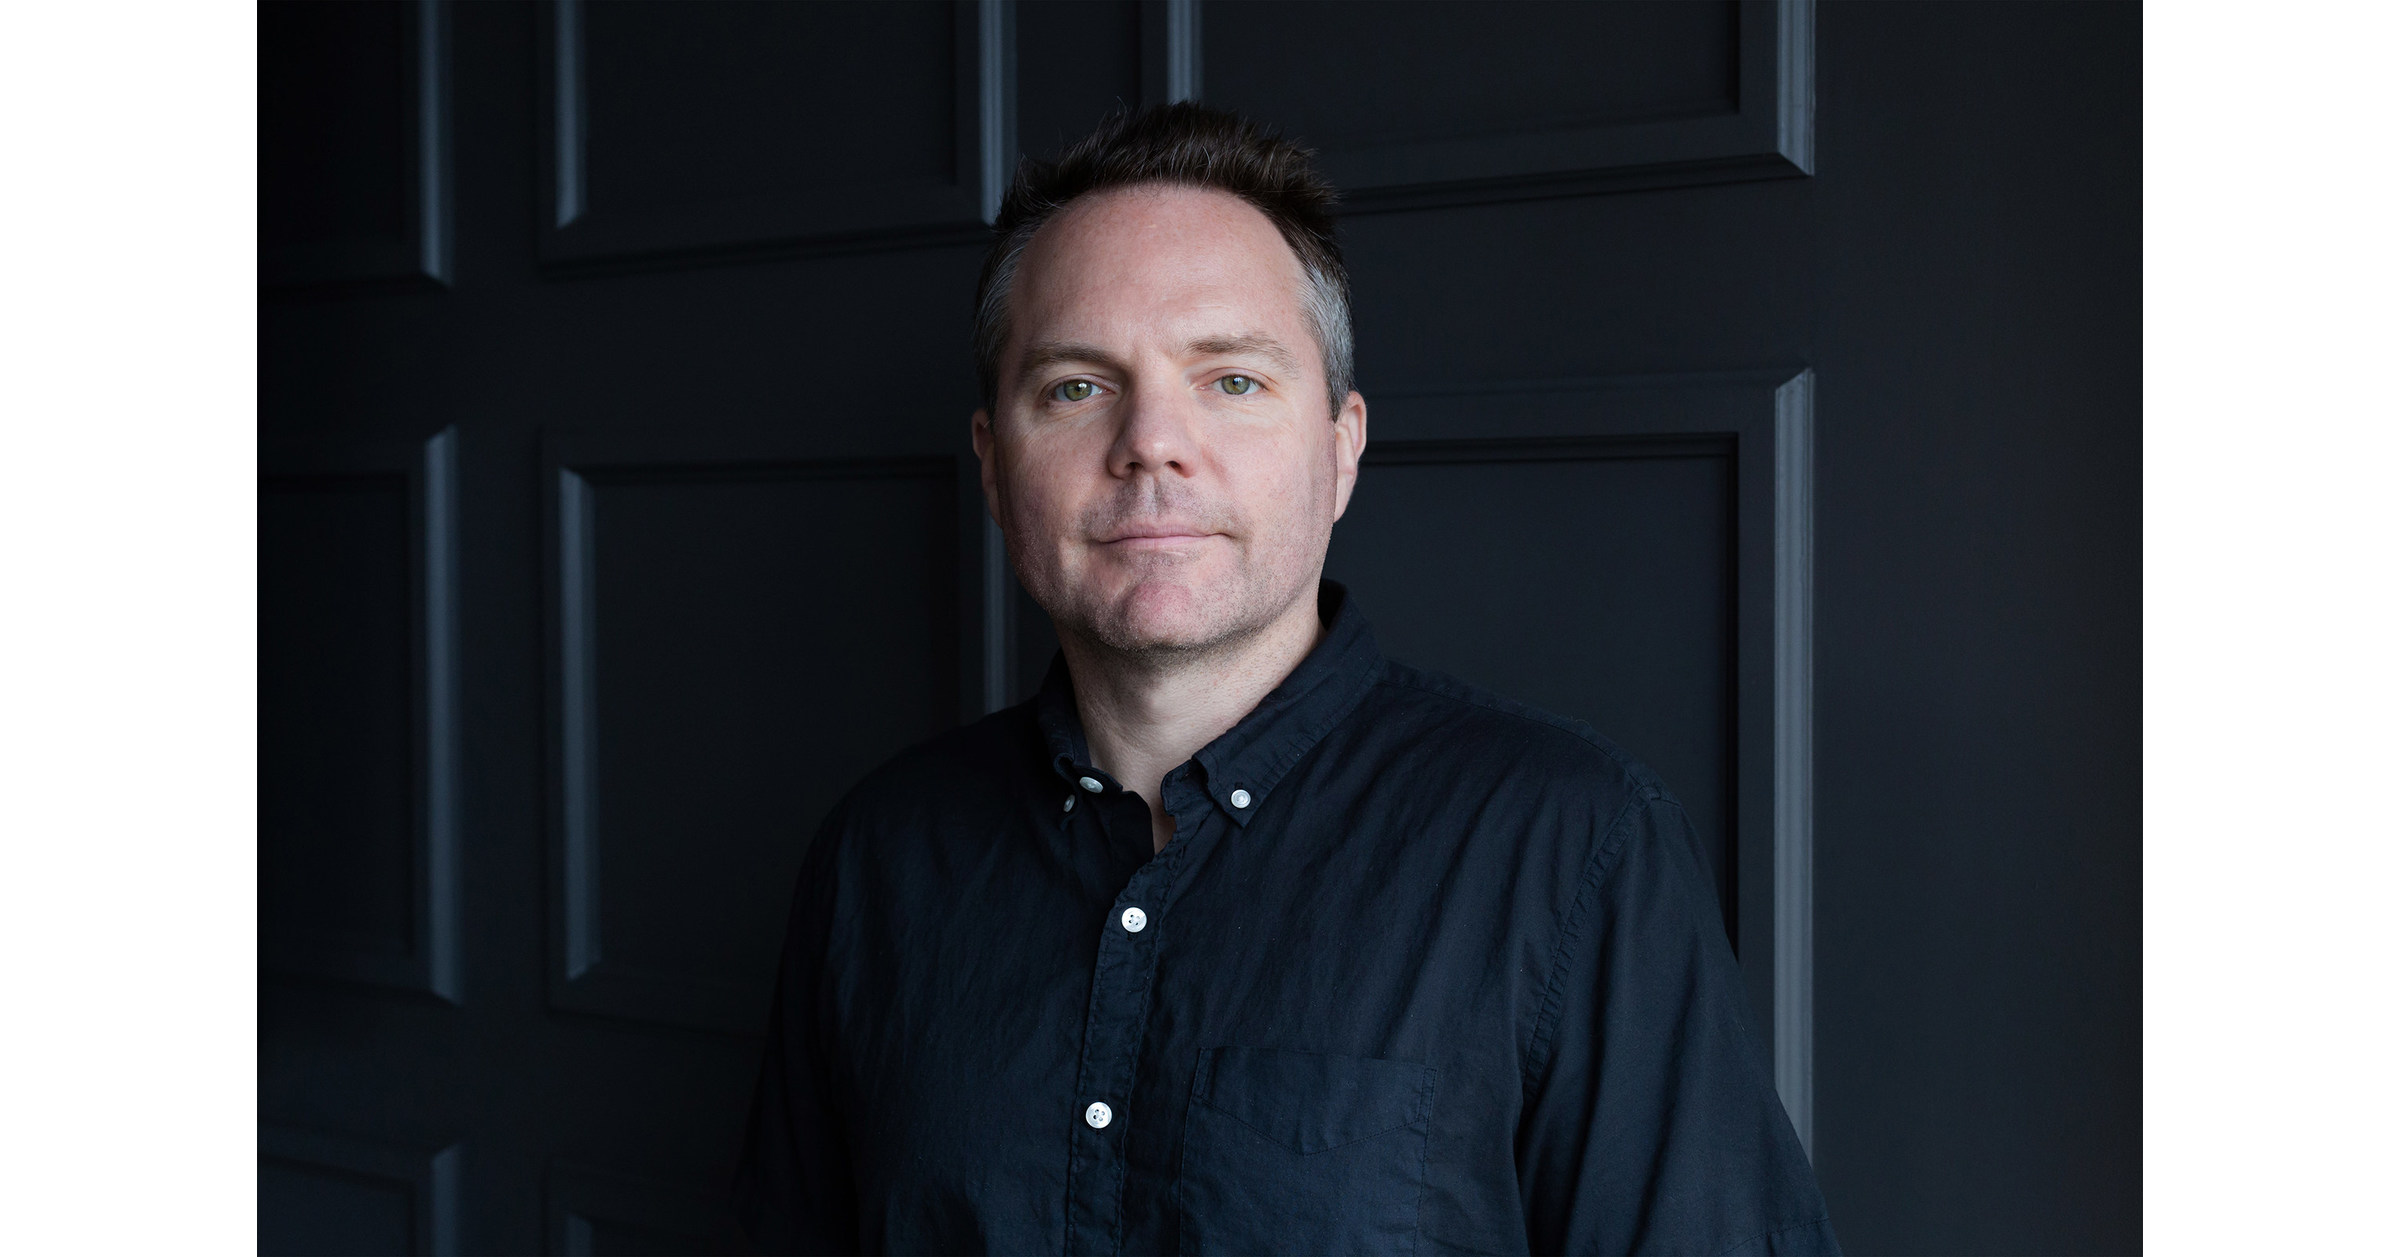 Mat Bisher Joins DDB New York as Chief Creative Officer, Further Fueling the Power of Creativity within the New York Office